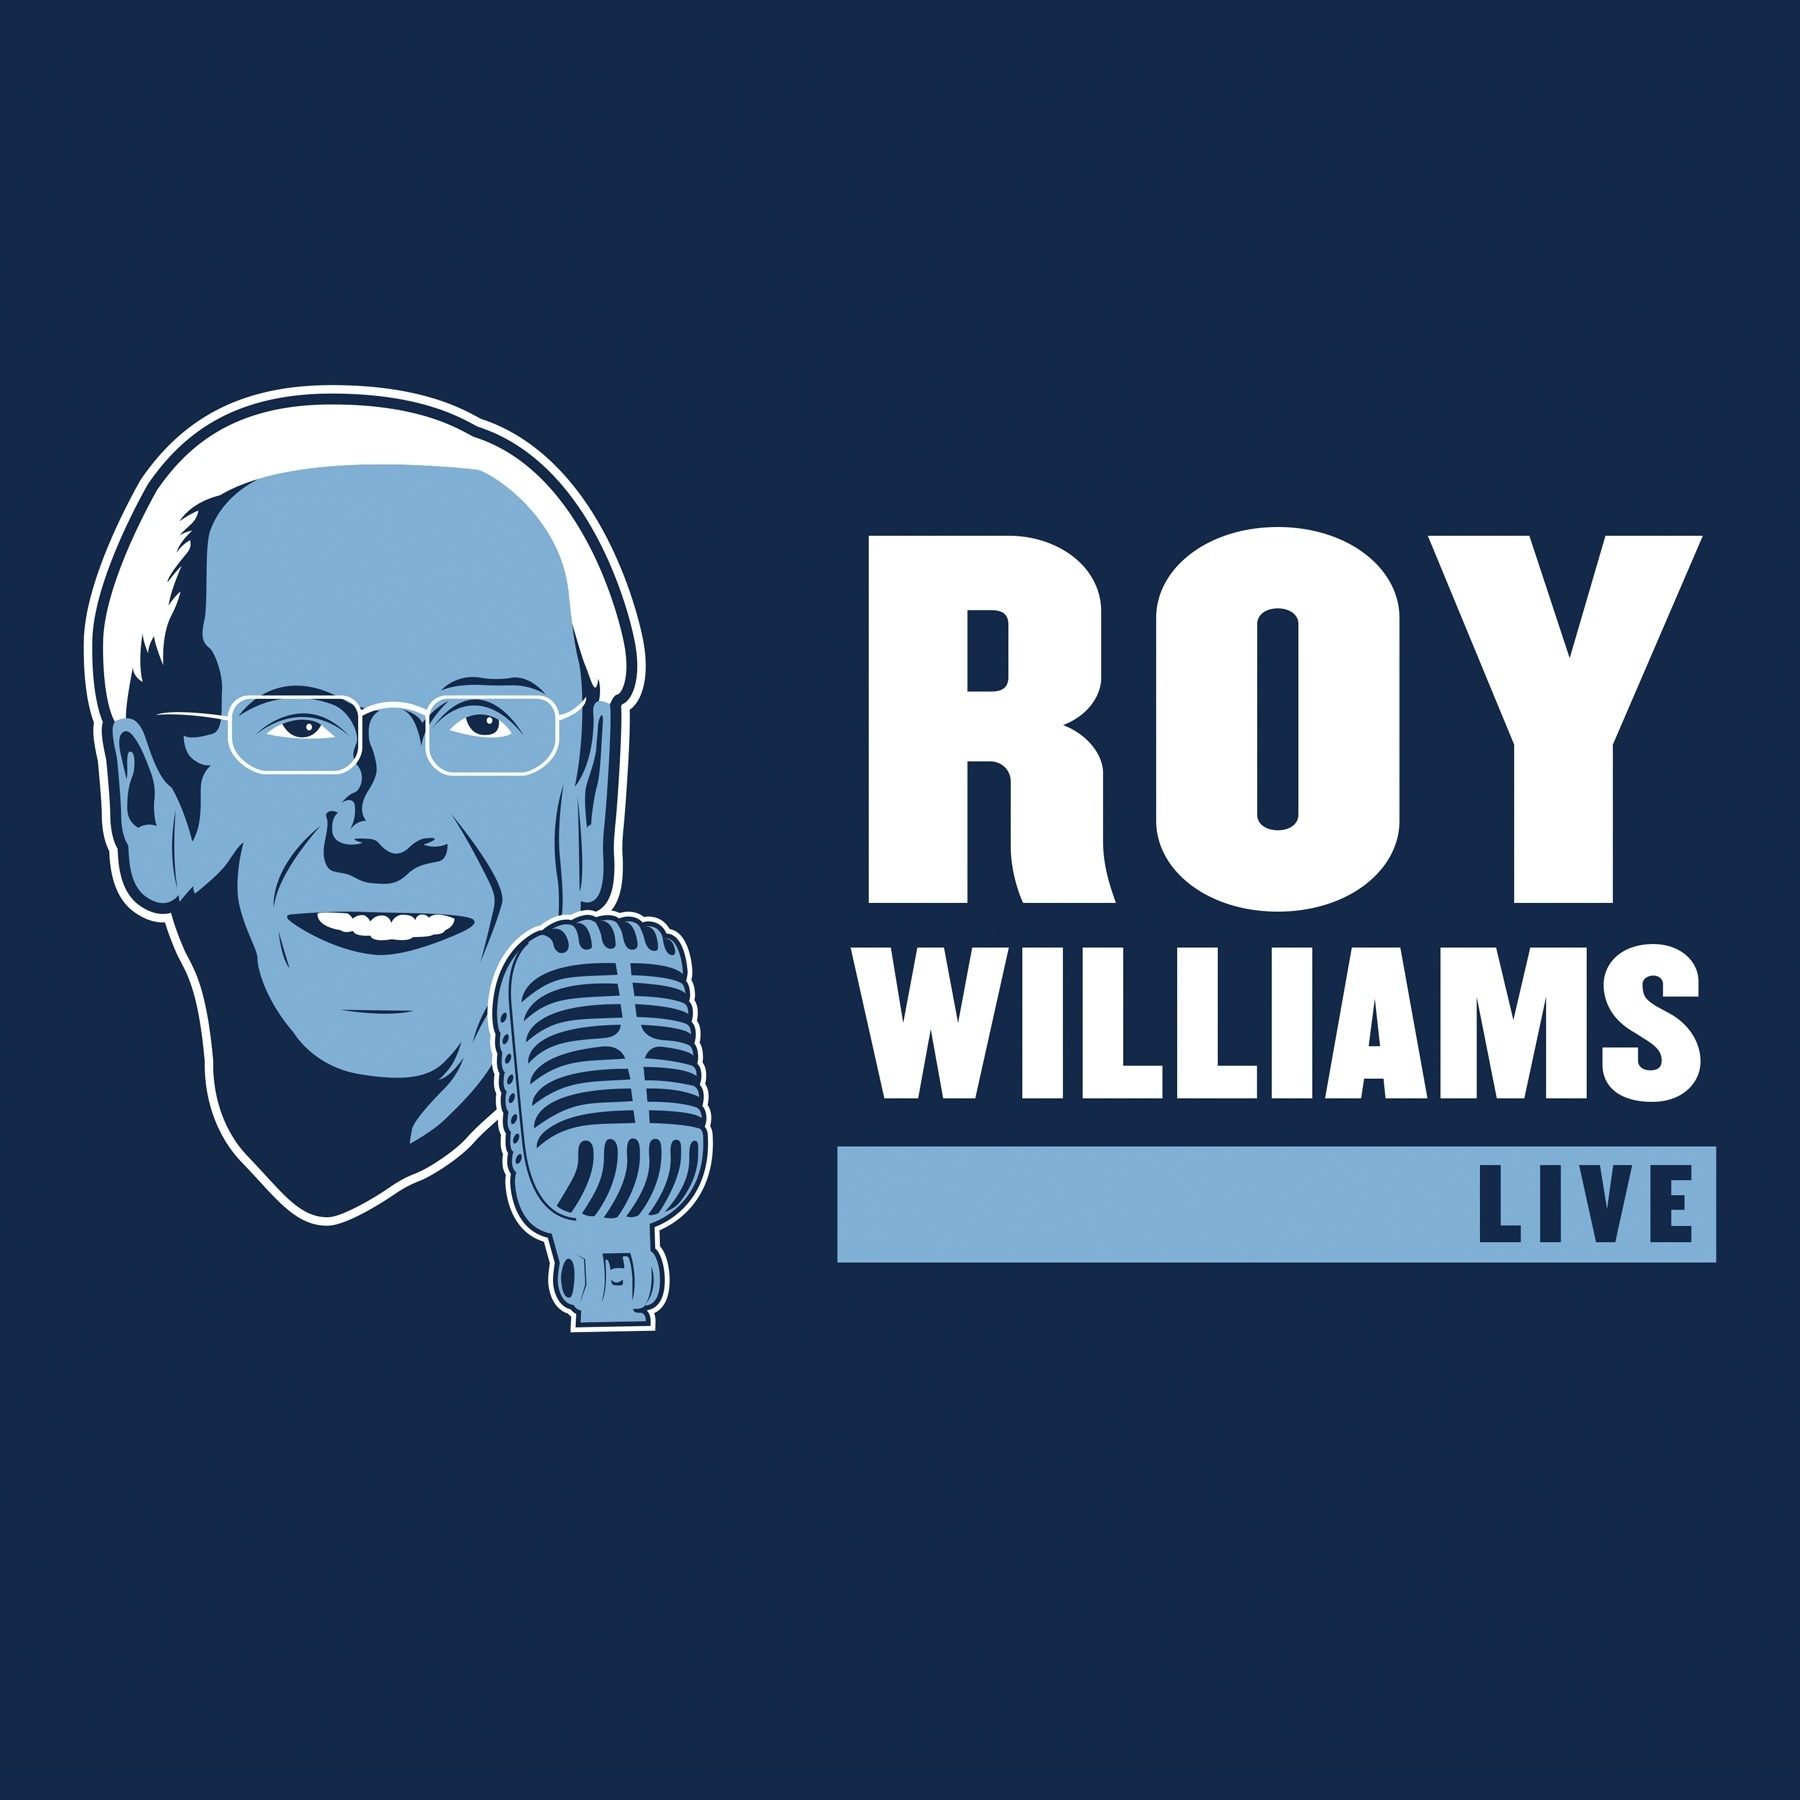 Roy Williams Live from 12-4-17